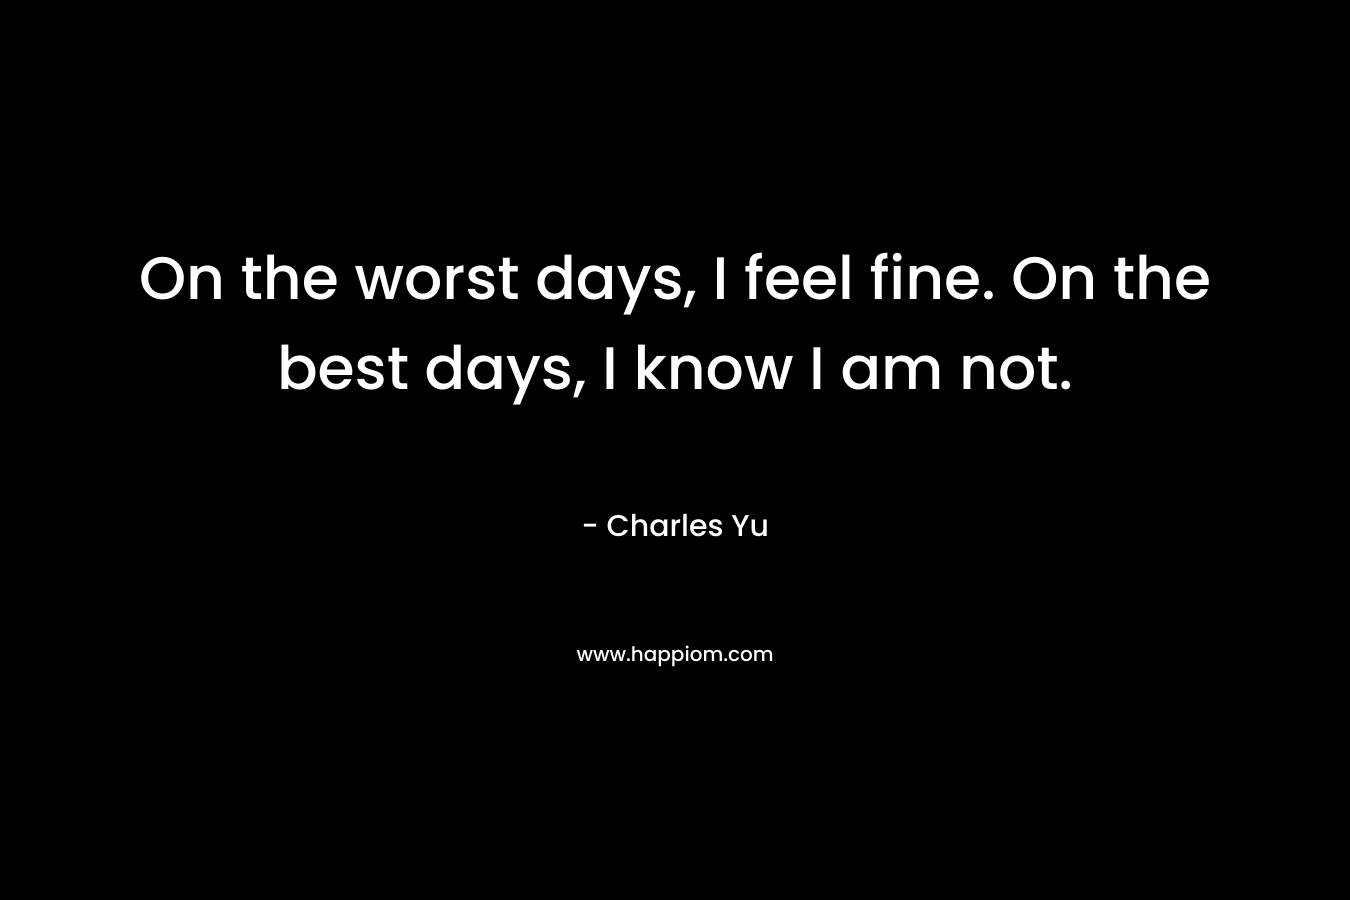 On the worst days, I feel fine. On the best days, I know I am not.